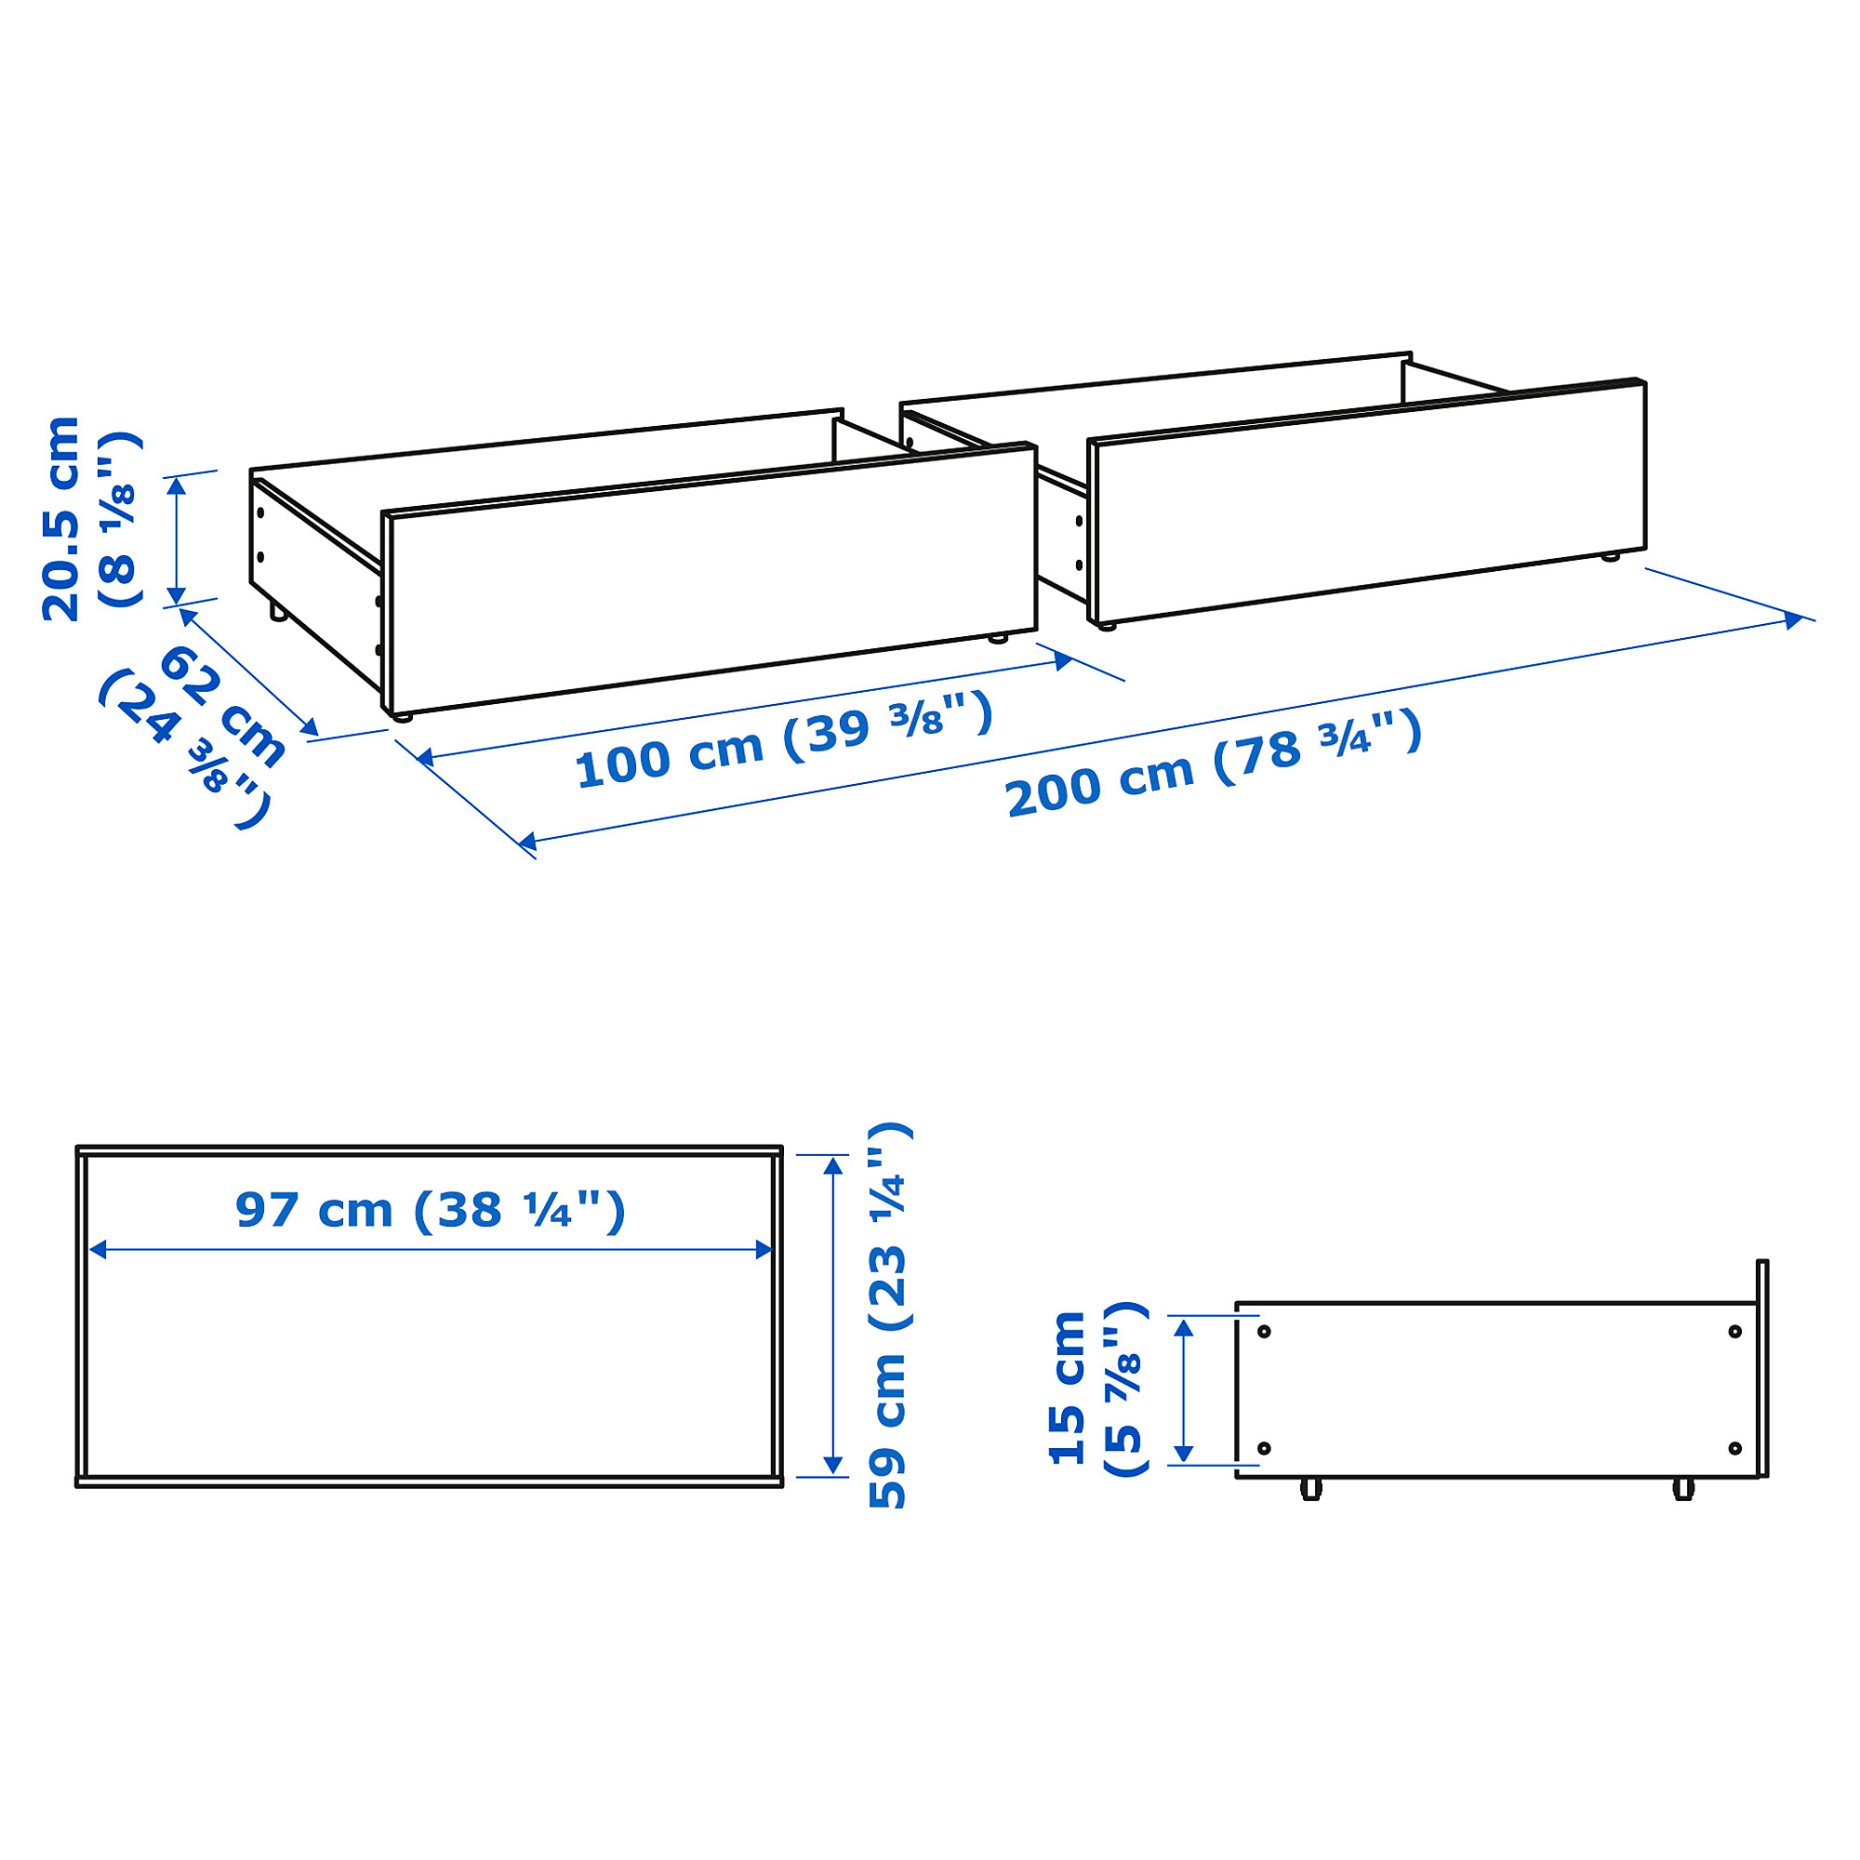 MALM, bed storage box for high bed frame, 902.646.90